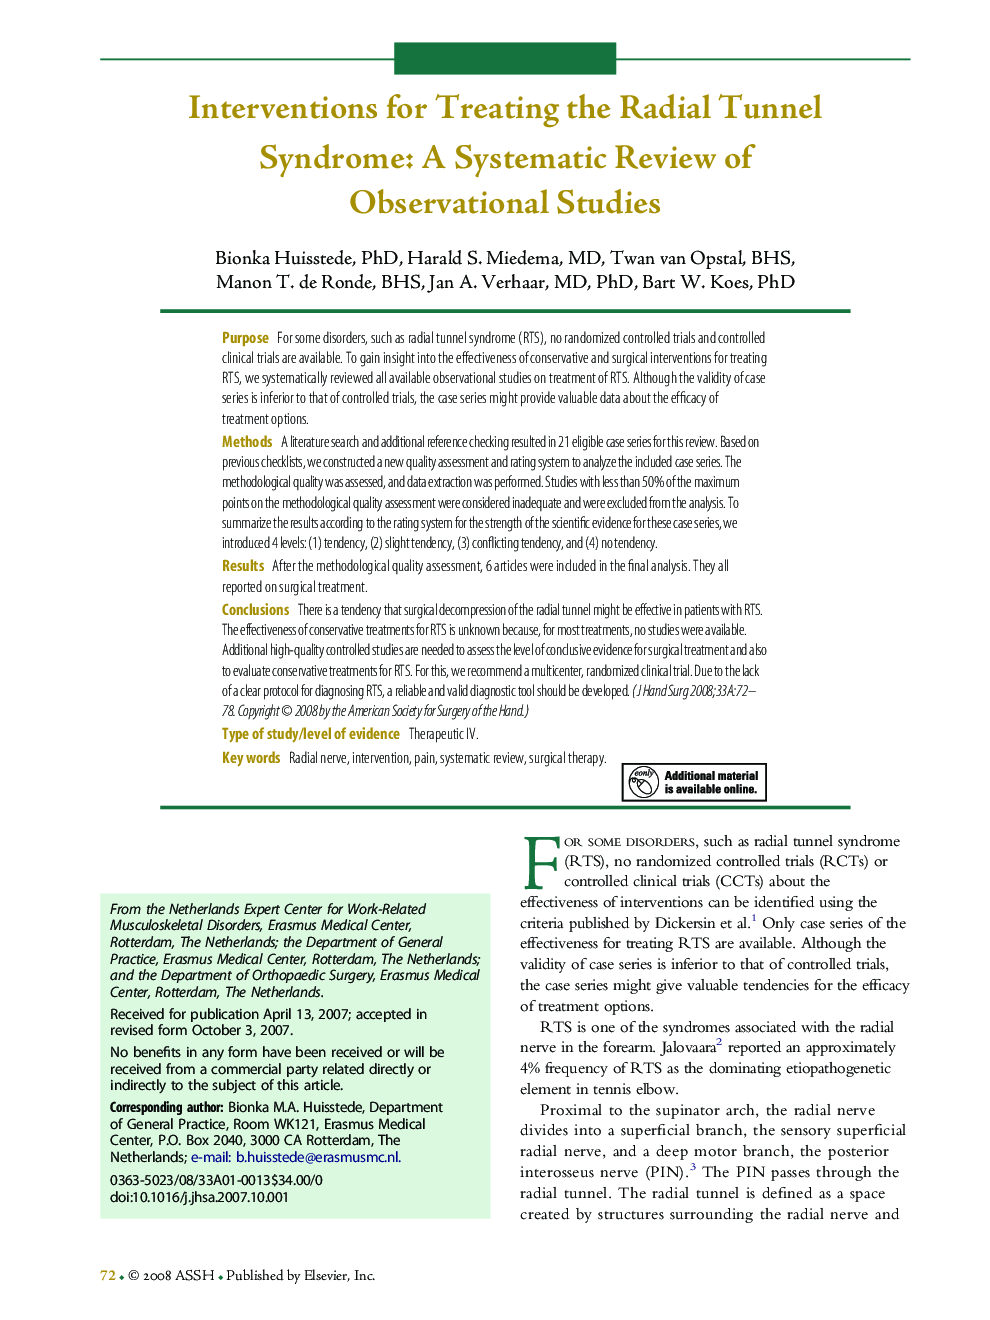 Interventions for Treating the Radial Tunnel Syndrome: A Systematic Review of Observational Studies